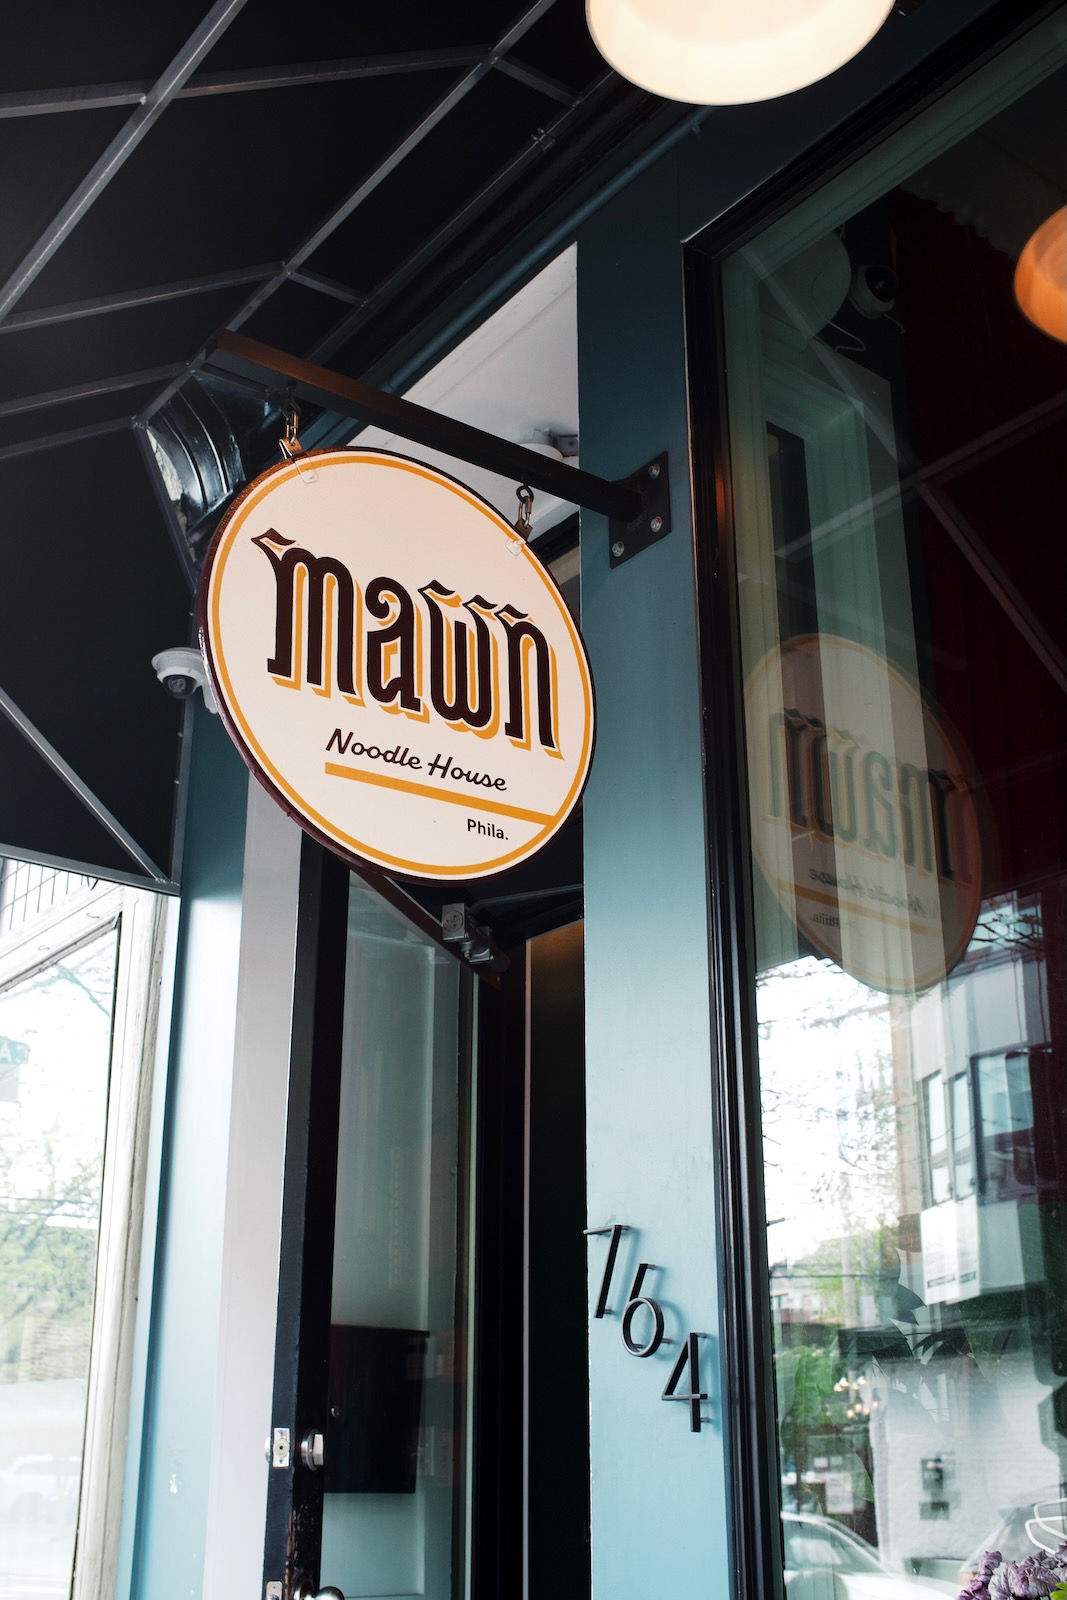 A round sign for Mawn Noodle House in Philadelphia. The sign hangs from a post and is reflected in the tall window at the front of the restaurant